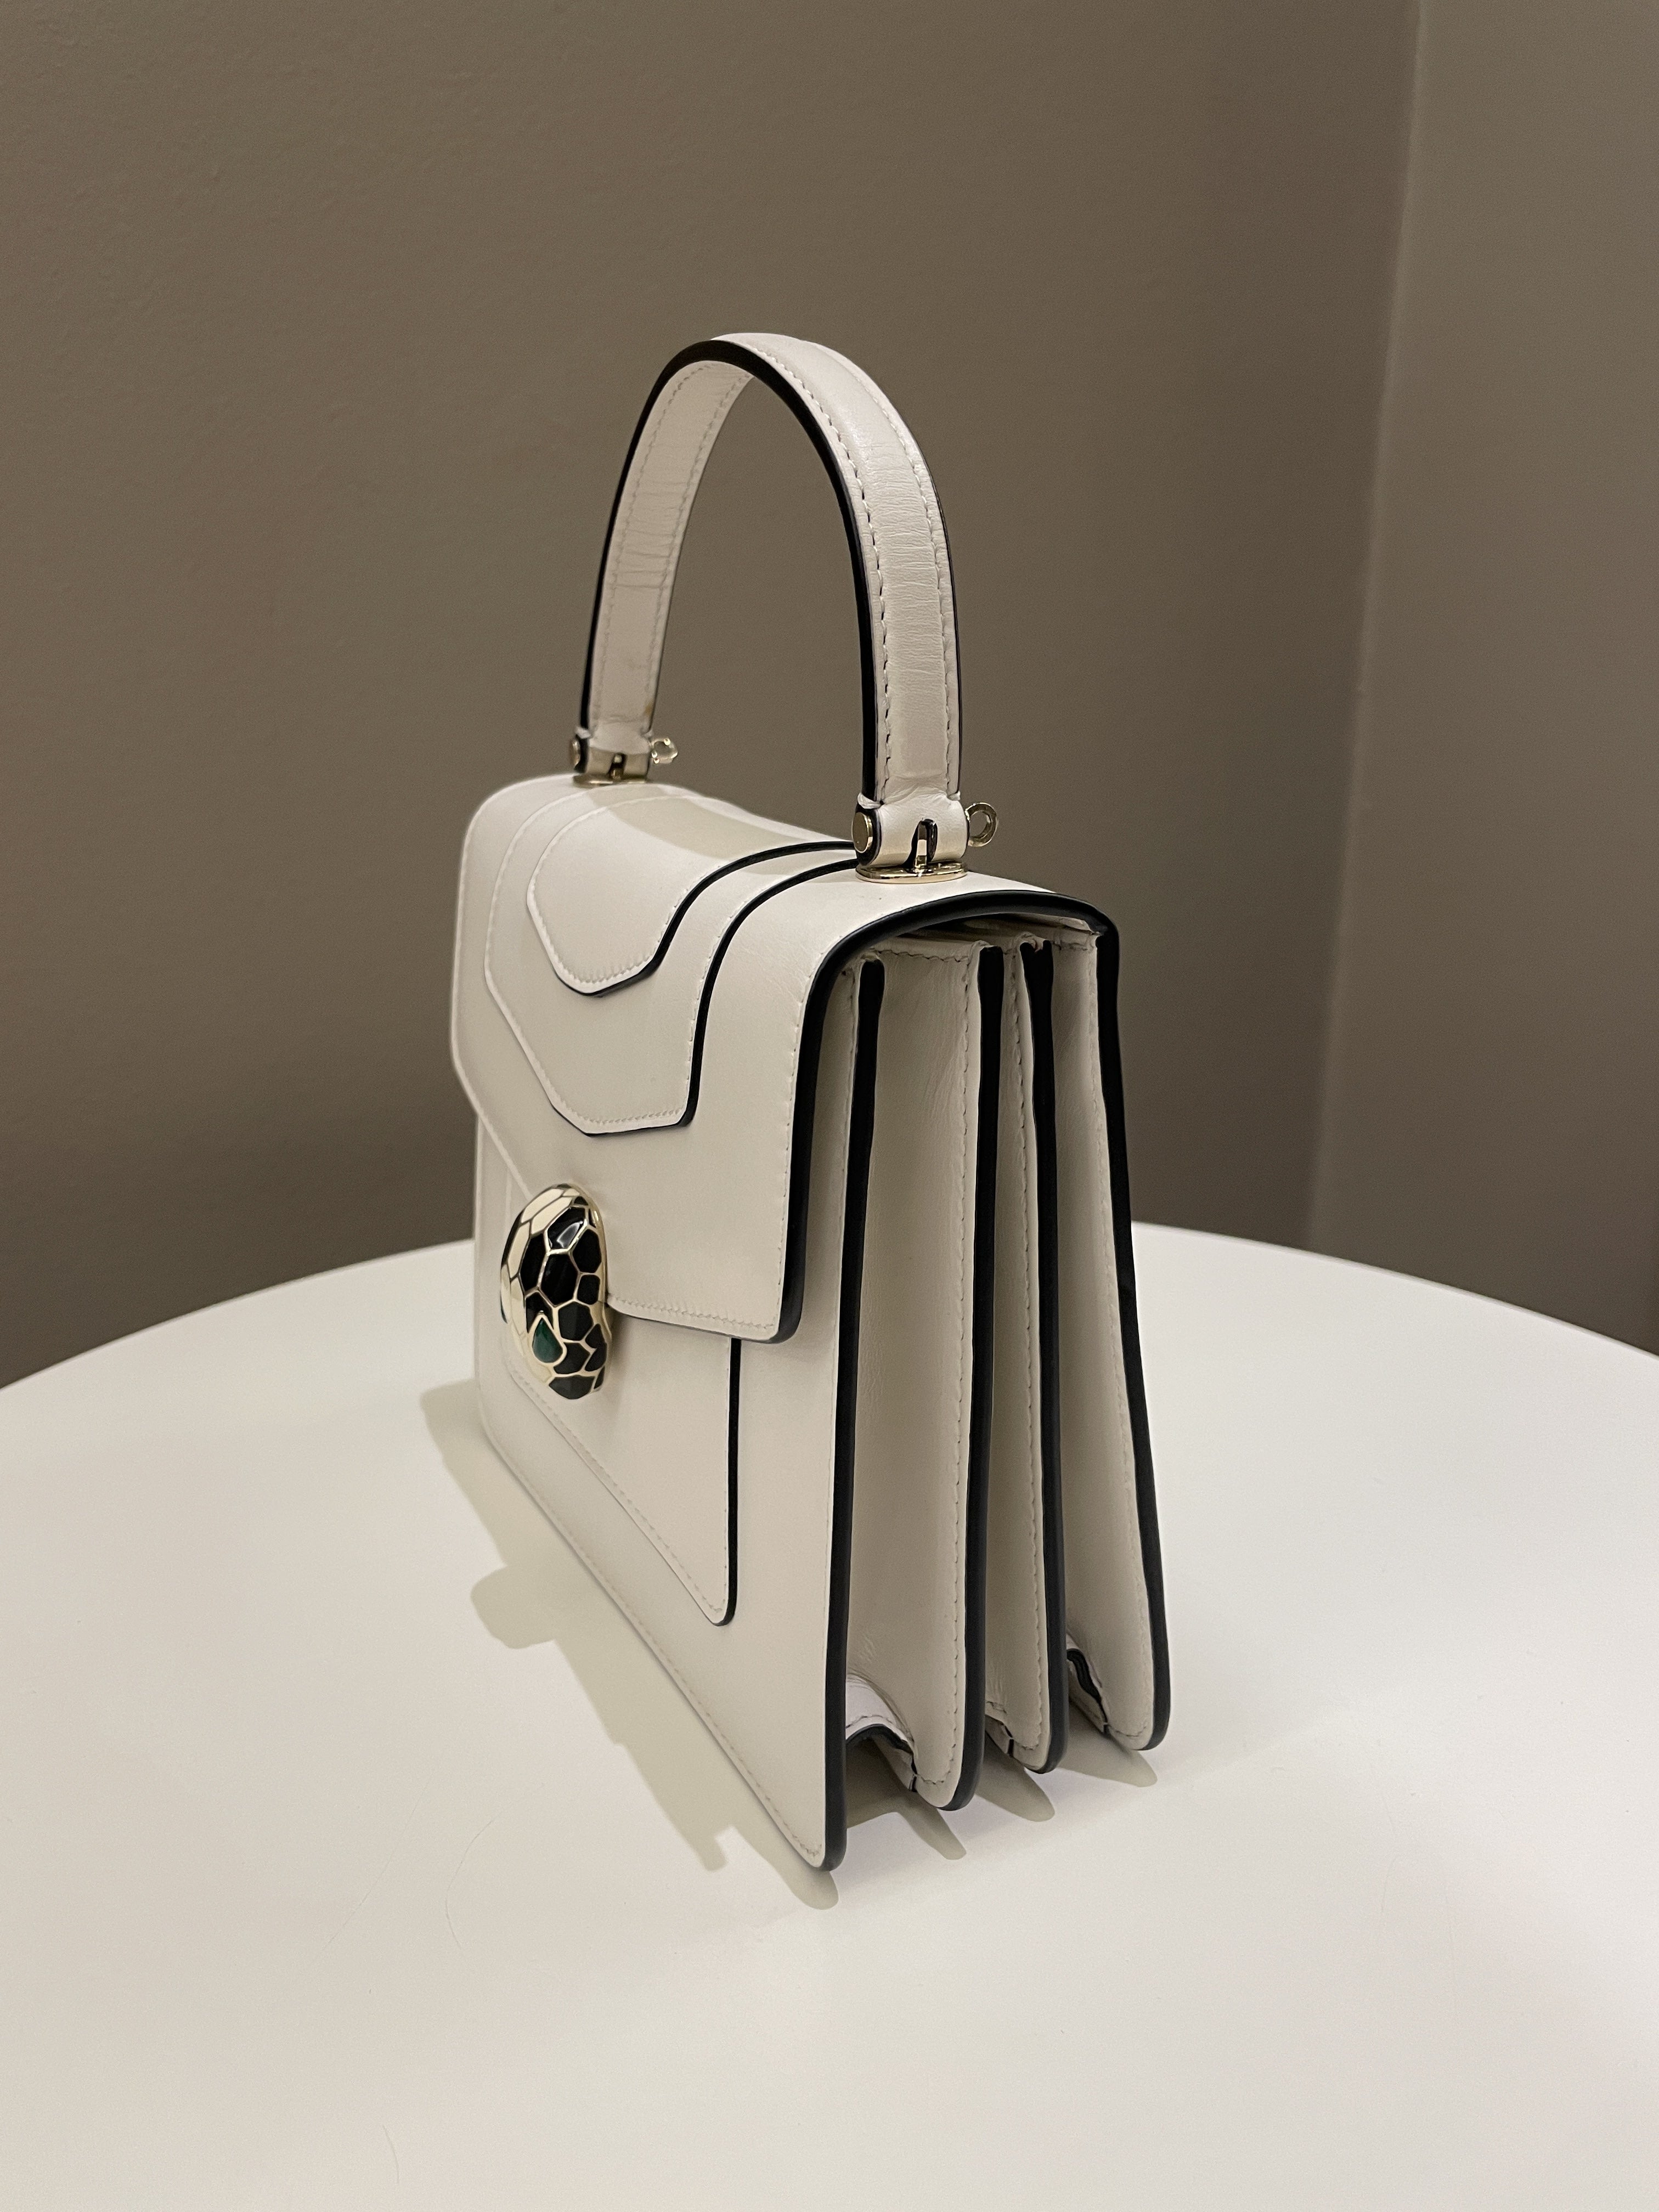 Bvlgari Sepenti Forever Bag
Ivory Calf Leather